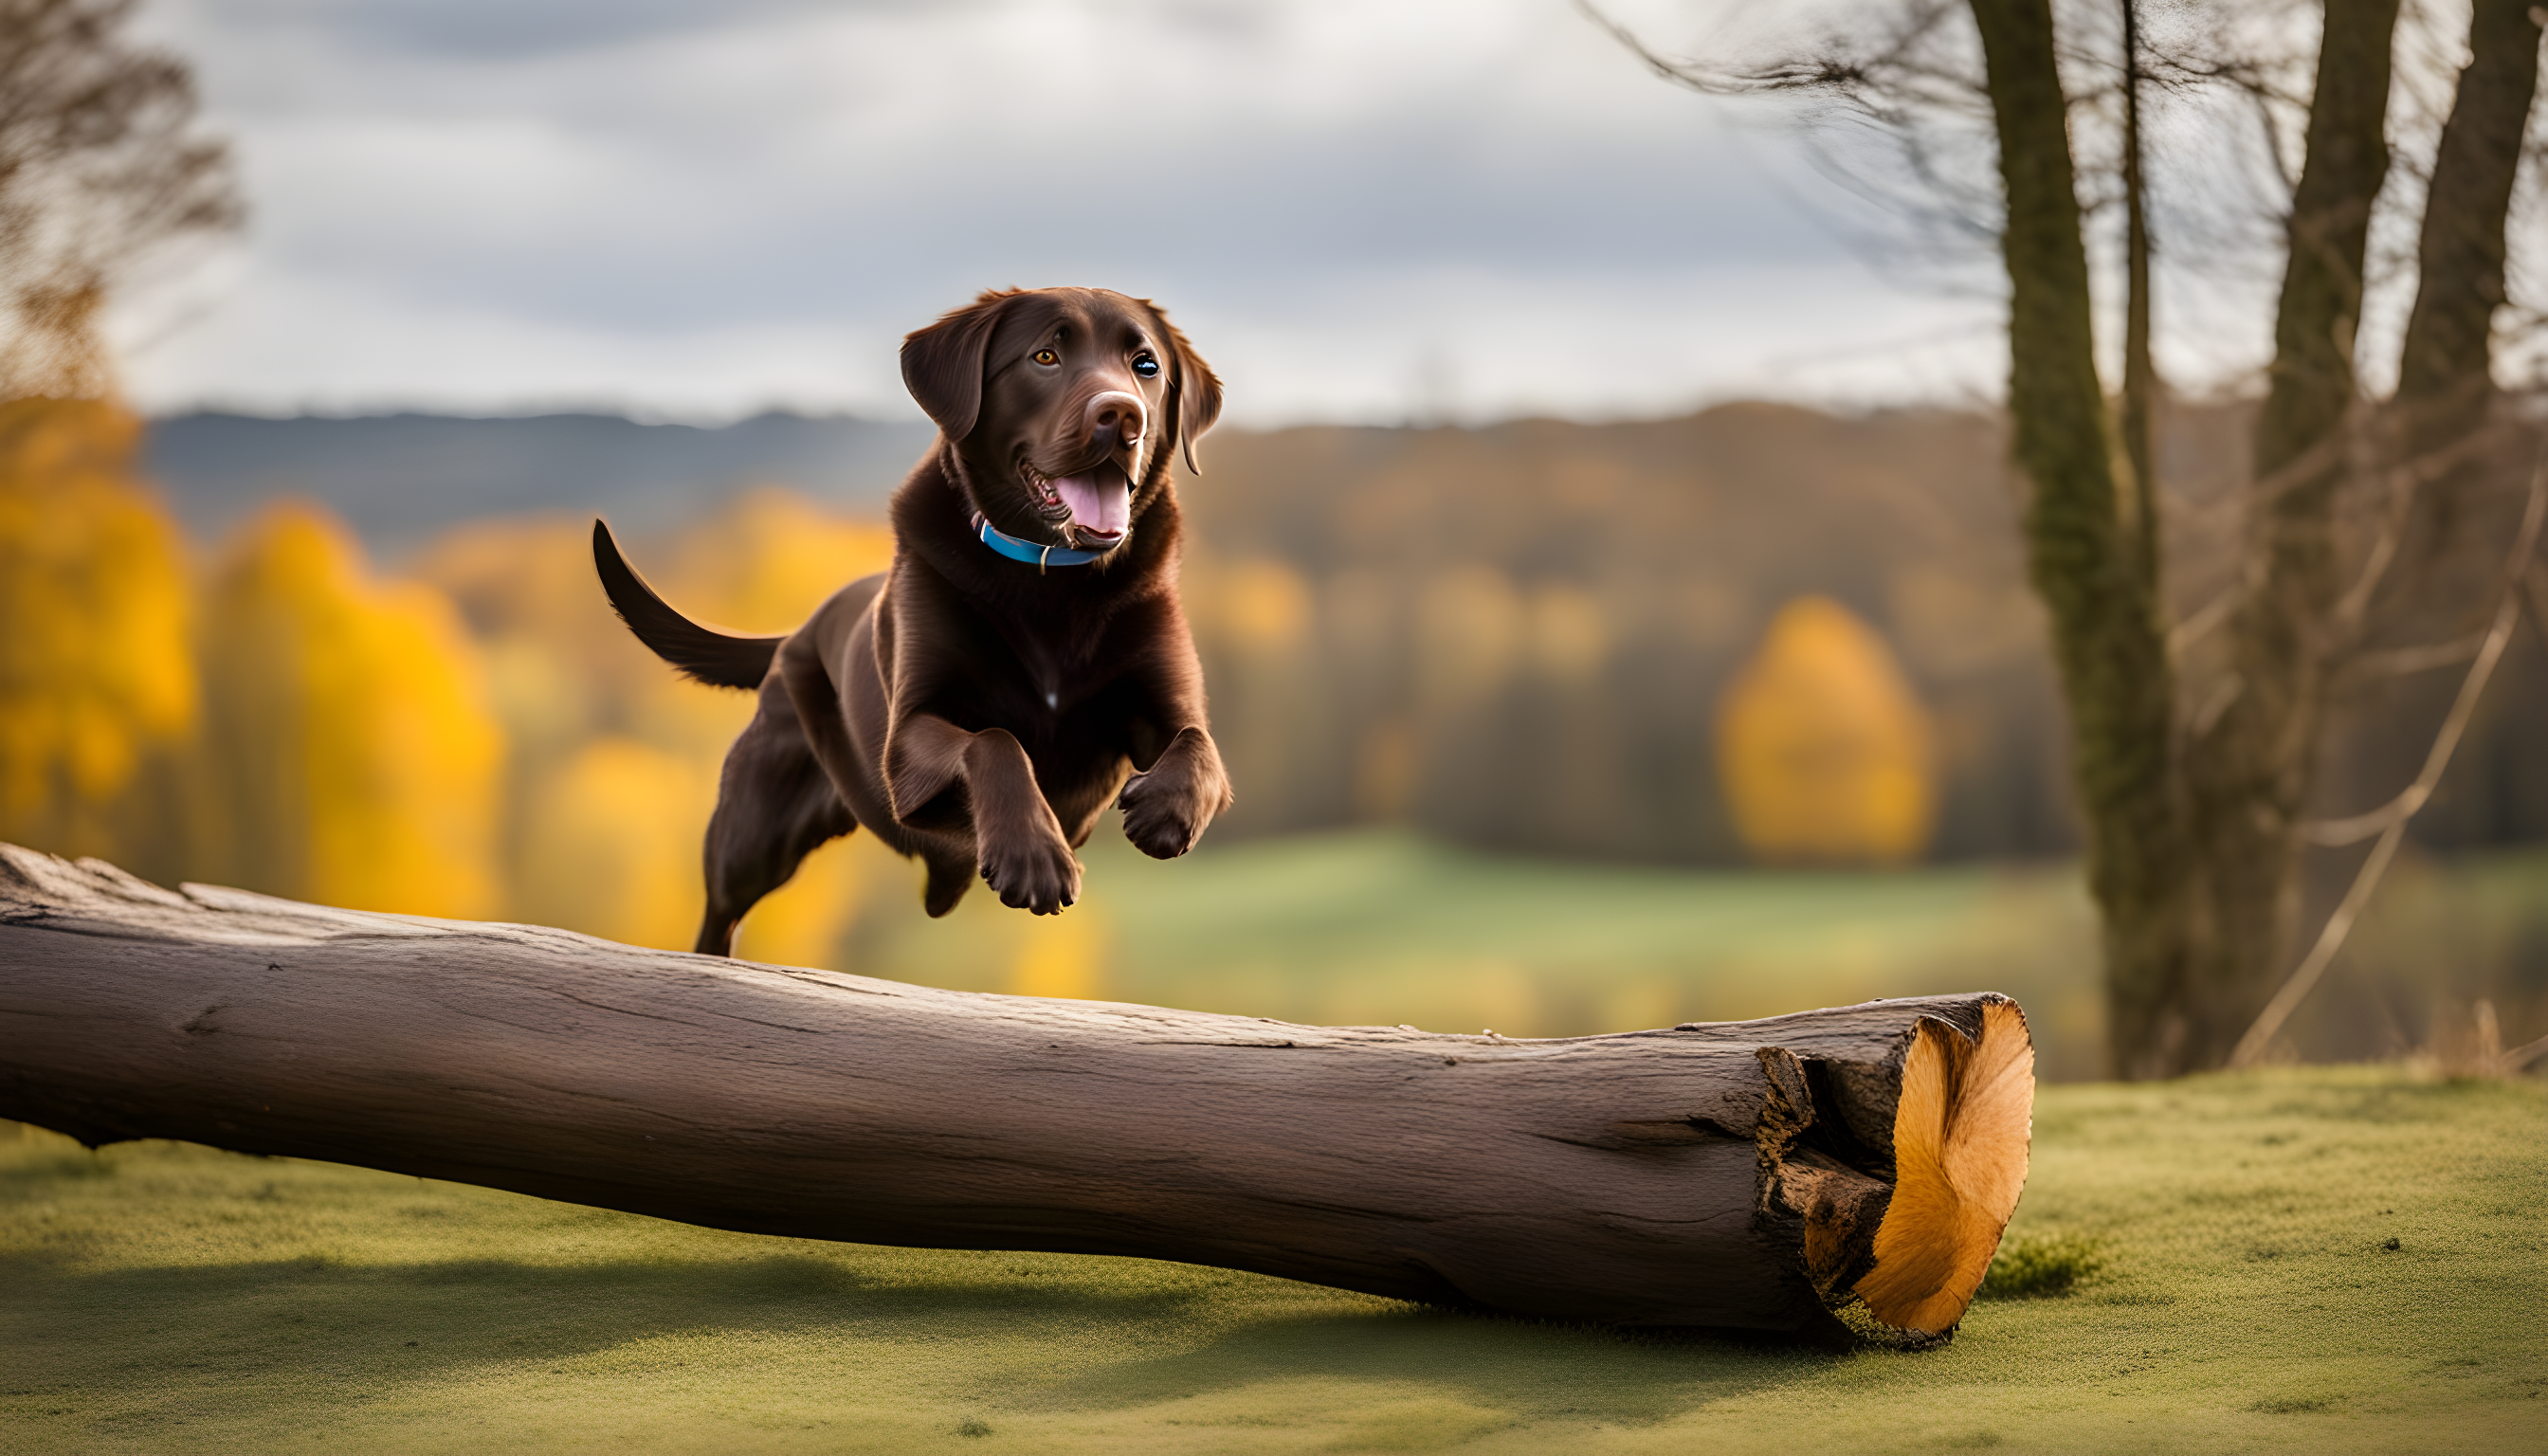 A sprightly English Chocolate Lab leaping over a log